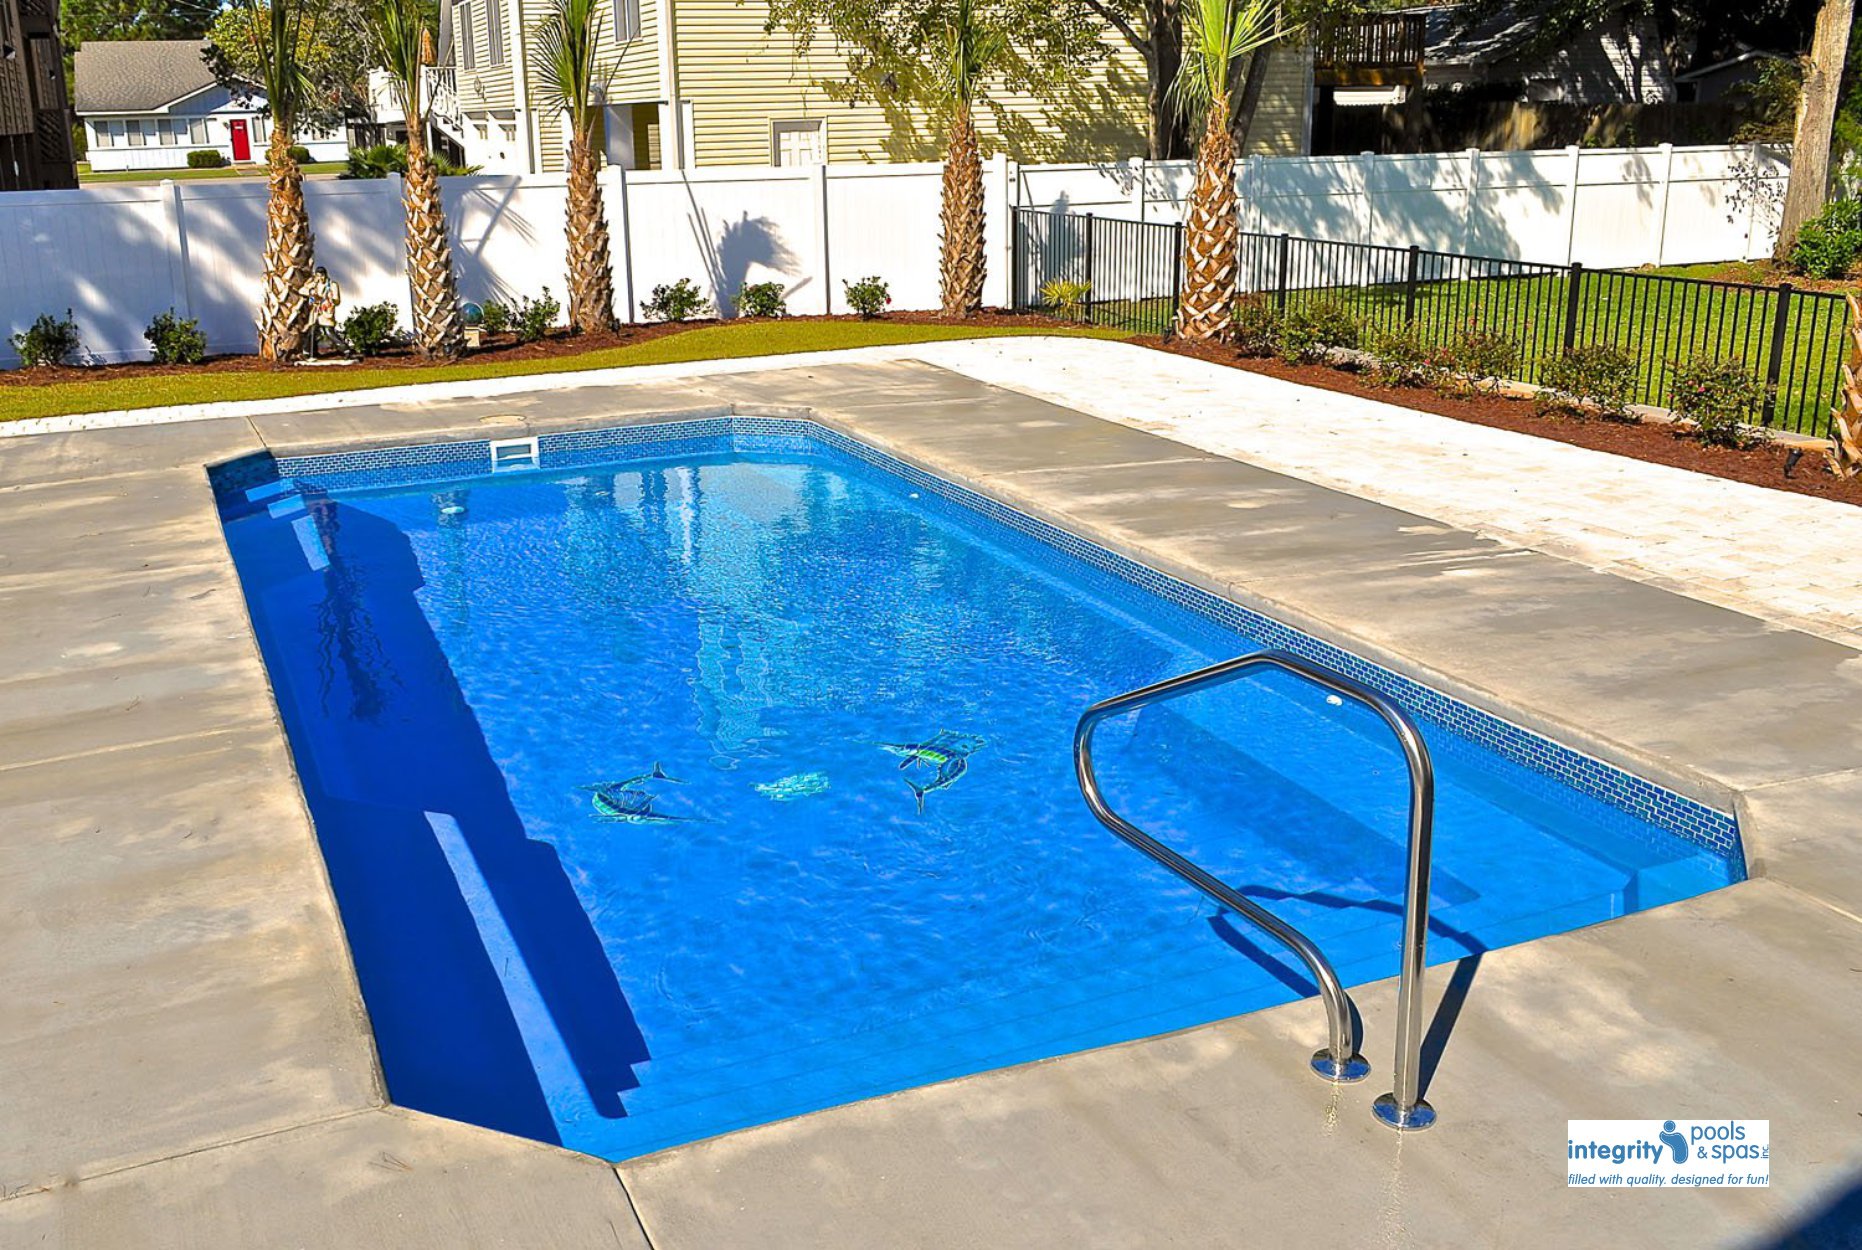 <div class='closebutton' onclick='return hs.close(this)' title='Close'></div><div class='firstH'><img src='images/logo-white-small.png'></div><h1>Rendezvous</h1><p>The Rendezvous in-ground fiberglass pool by Riviera Fiberglass Pools Offered by Fun and Fit Pools and Spas (Photo #009).<p>Available Sizes:</p><ul><li>35' 1'' x 13' 9''</li><li>29' x 13' 9''</li><li>23' x 11' 8''</li></ul></p><div class='getSocial'><h1>Share</h1><p class='photoBy'>Photo by Fun and Fit Pools and Spas</p><iframe src='http://www.facebook.com/plugins/like.php?href=http%3A%2F%2Ffunandfitpools.com%2Fimages%2Fgalleries%2Fin-ground-pools%2Frendezvous%2Fwm%2F009.jpg&send=false&layout=button_count&width=100&show_faces=false&action=like&colorscheme=light&font&height=21' scrolling='no' frameborder='0' style='border:none; overflow:hidden; width:100px; height:21px;' allowTransparency='true'></iframe><br><a href='http://pinterest.com/pin/create/button/?url=http%3A%2F%2Fwww.funandfitpools.com&media=http%3A%2F%2Fwww.funandfitpools.com%2Fimages%2Fgalleries%2Fin-ground-pools%2Frendezvous%2Fwm%2F009.jpg&description=Pools' data-pin-do='buttonPin' data-pin-config=\'above\'><img src='http://assets.pinterest.com/images/pidgets/pin_it_button.png' /></a><br></div>